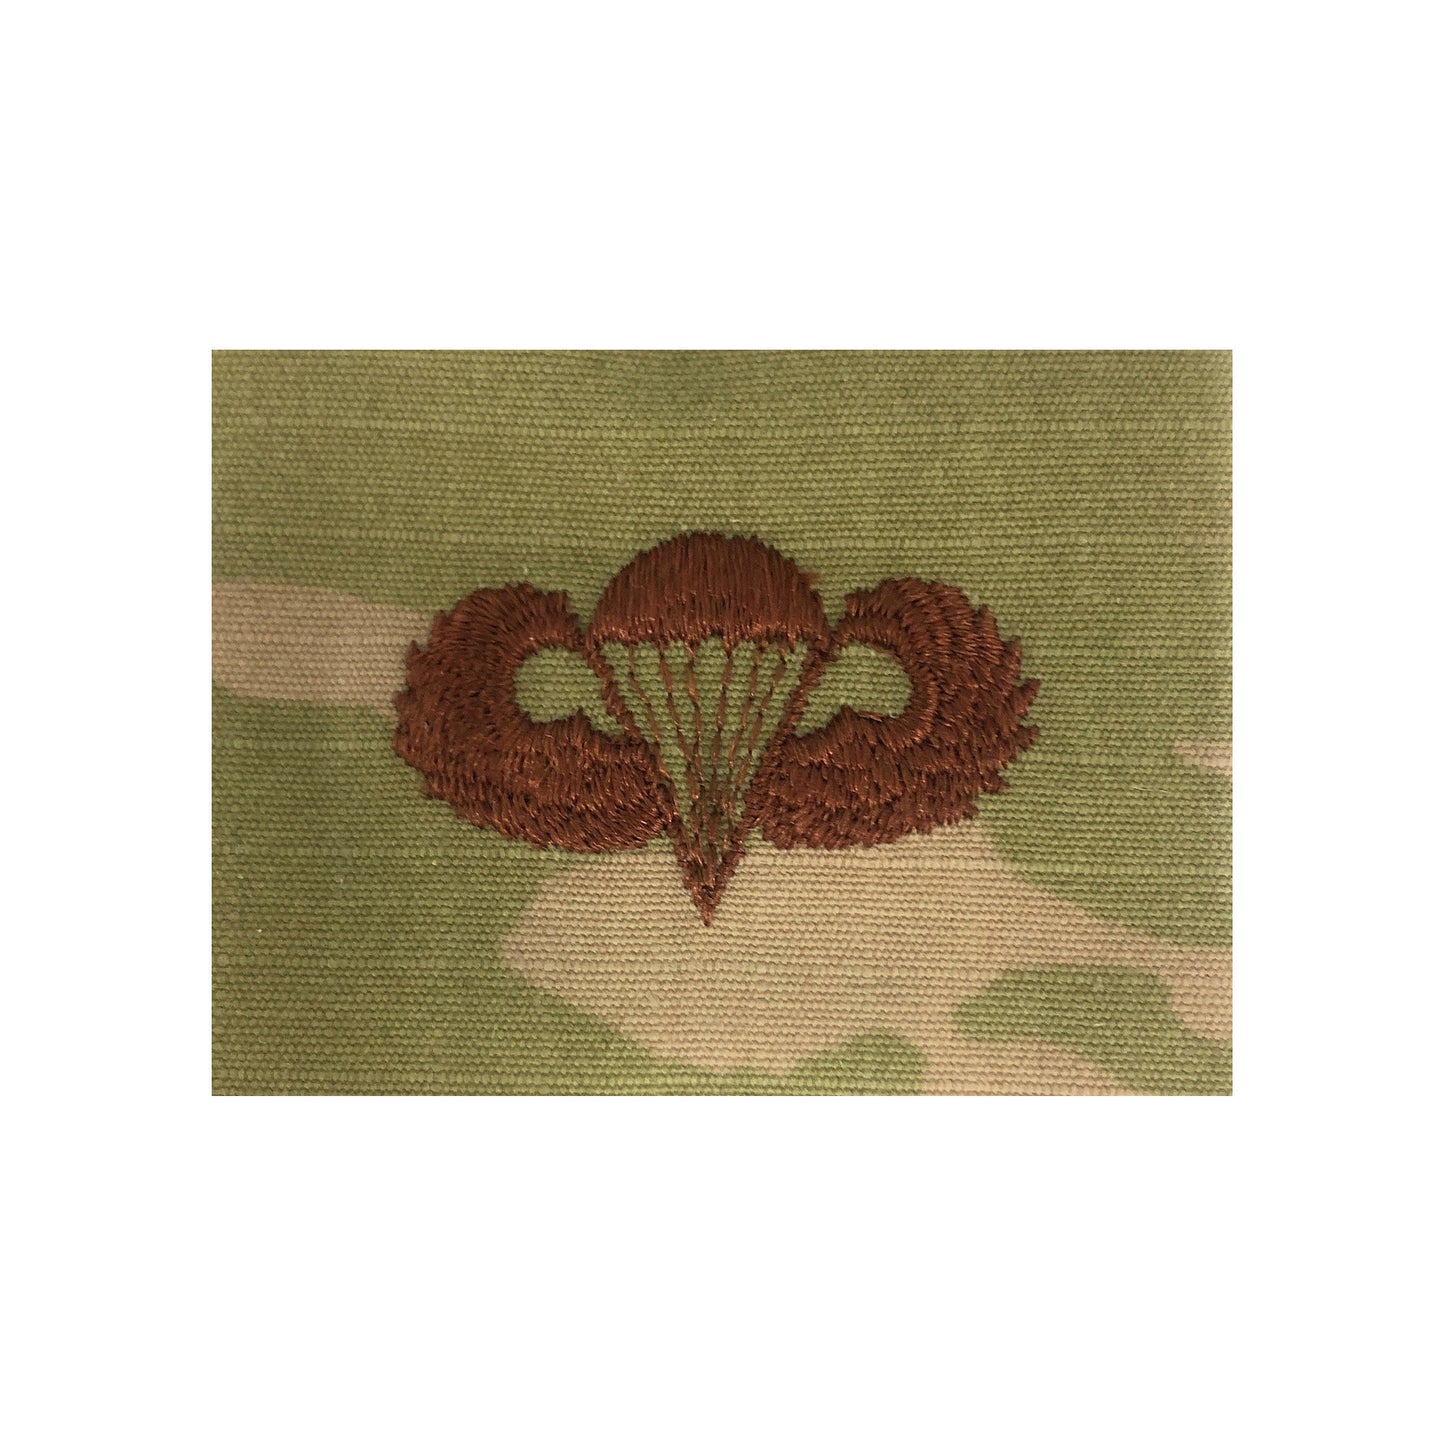 US Air Force Parachutist Basic OCP Spice Brown Sew-on Badge Free Standard Shipping in the USA